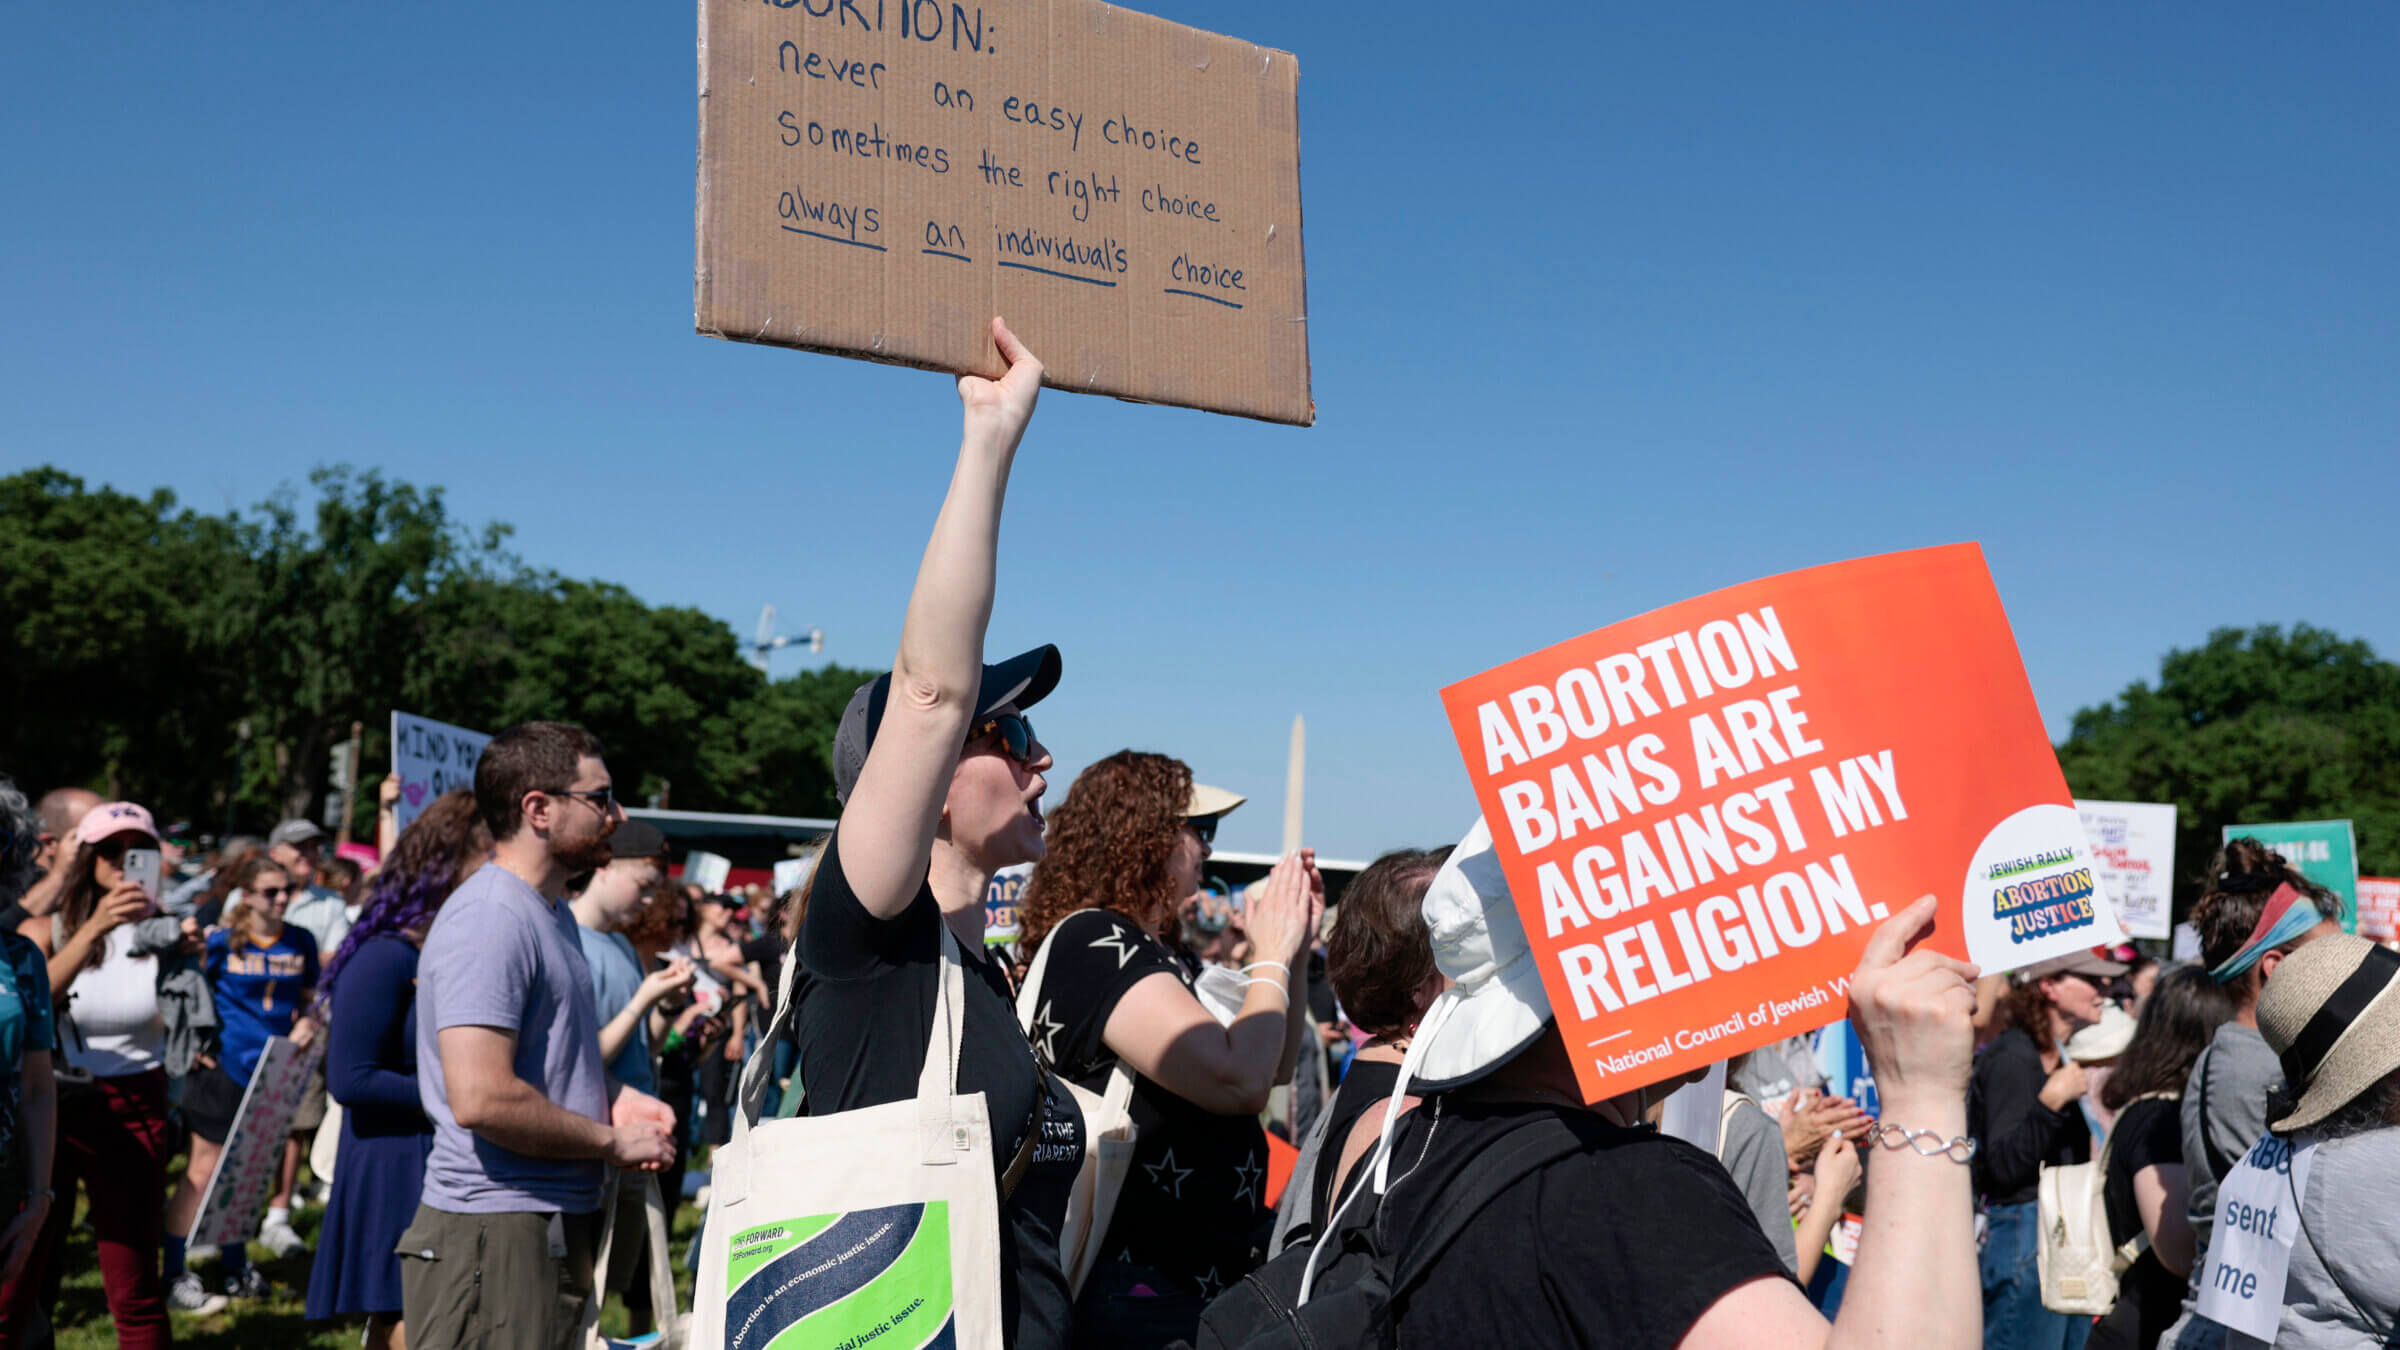 A protester carries a sign as they attend the “Jewish Rally for Abortion Justice” rally in May.